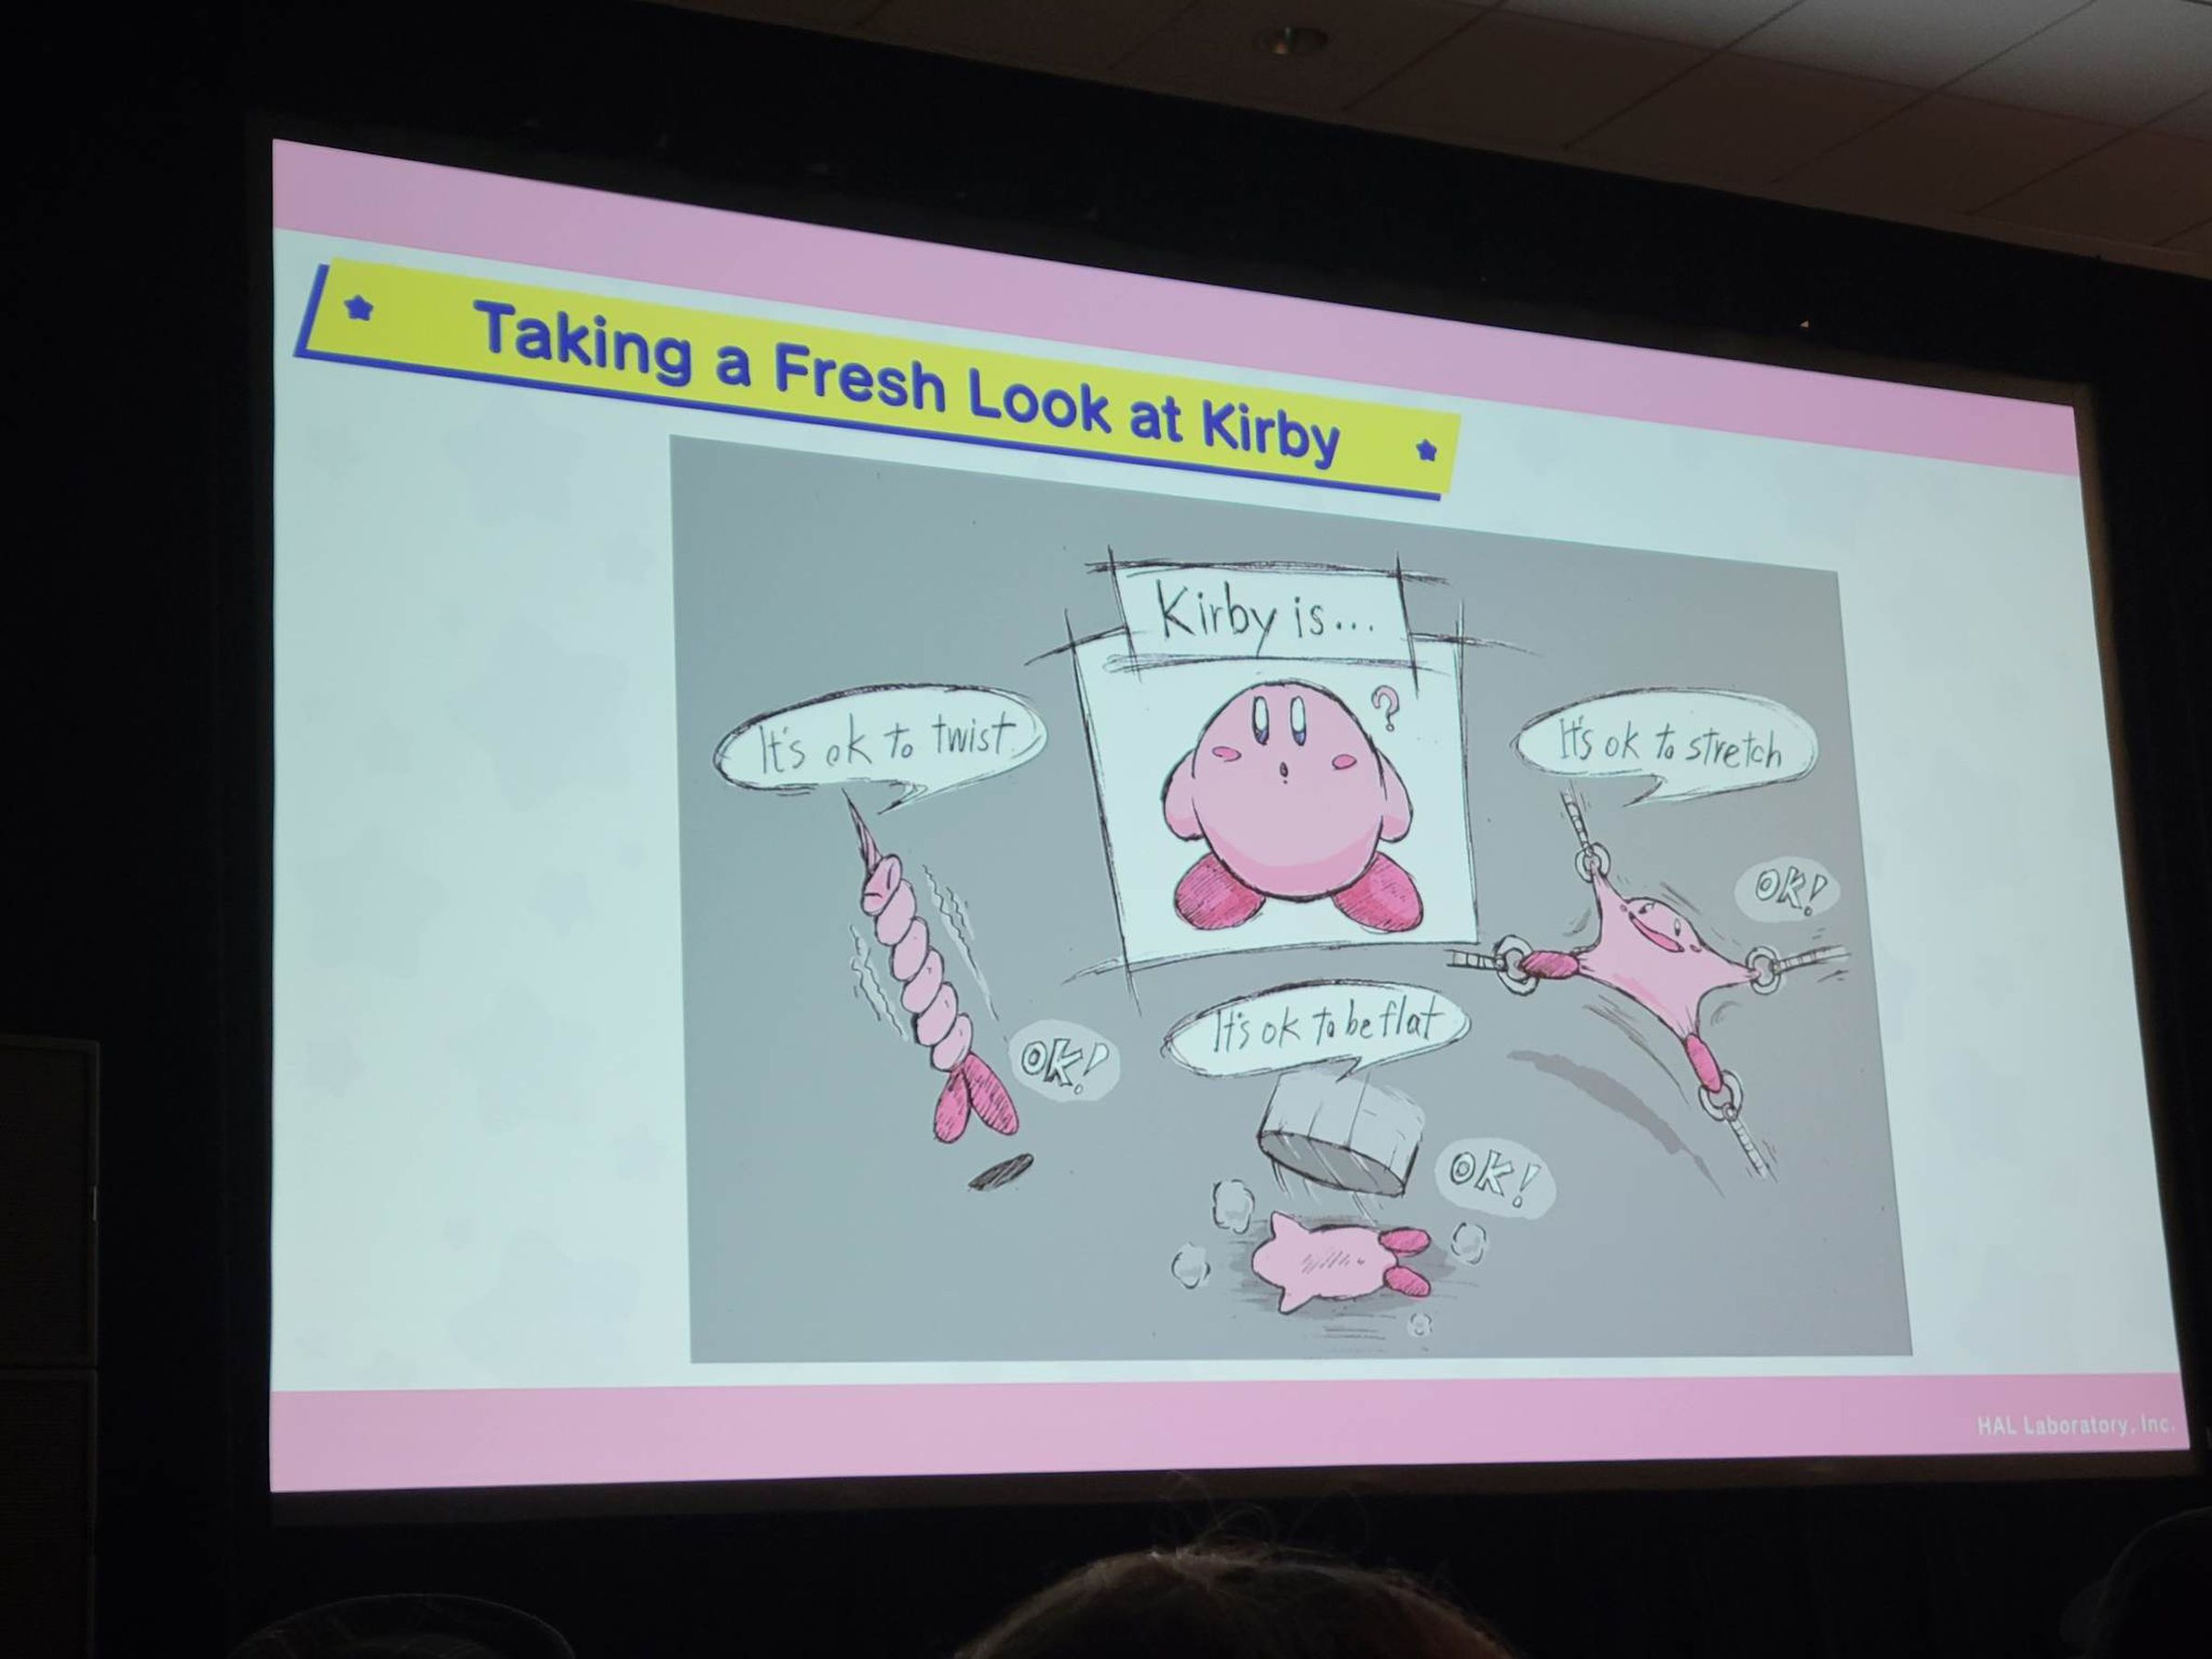 Photo of a slide from a GDC presentation featuring the pink round blob hero Kirby twisted, flattened, and stretched into weird but cute configurations